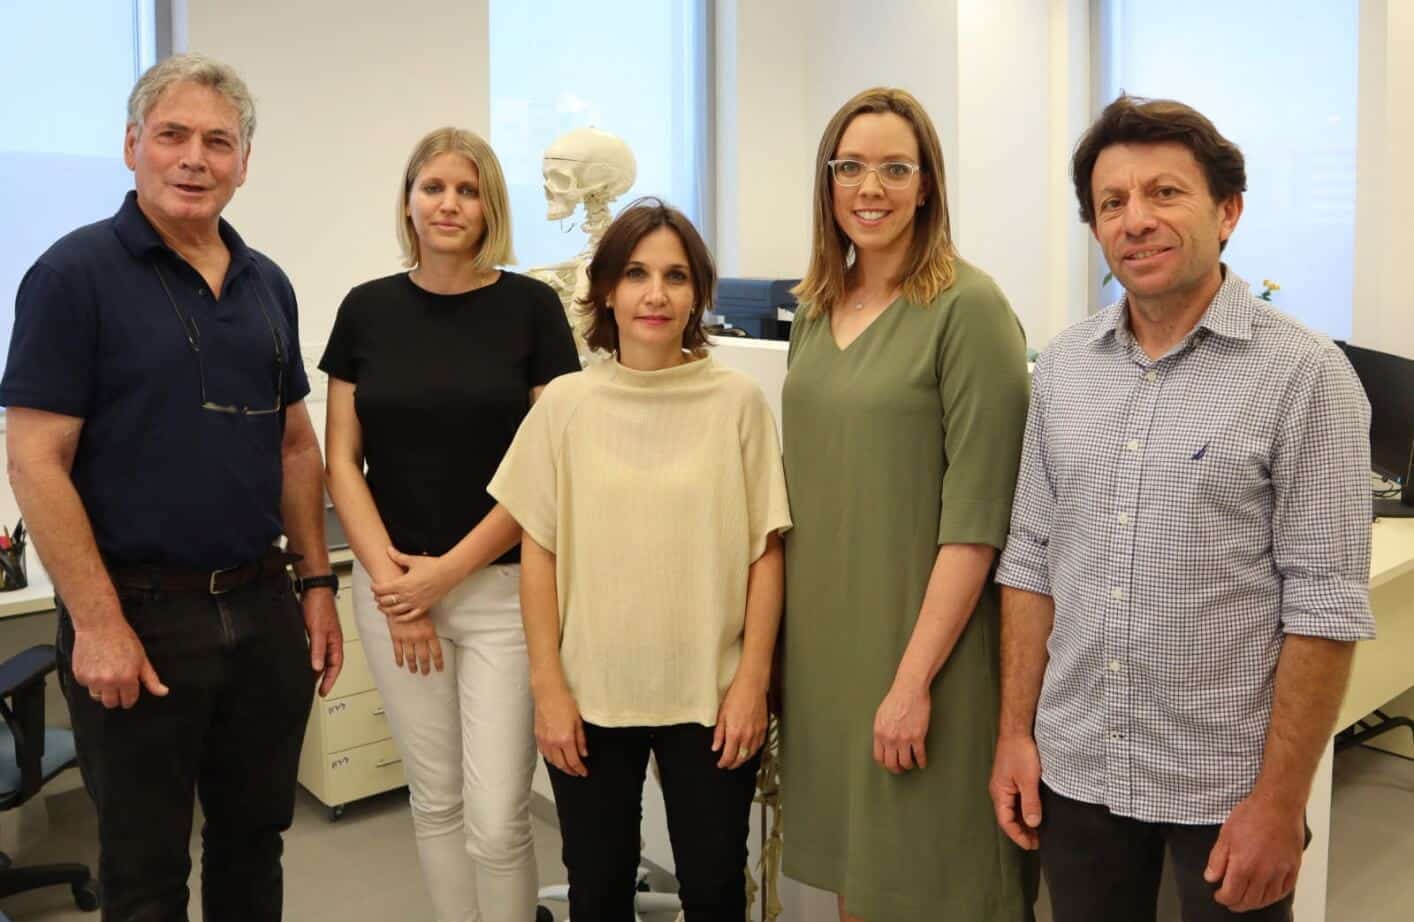 The research team (from right to left): Yossi Zeidner, Rachel Sharig, Hila May, Marion Prevost and Israel Hershkowitz. Credit: Tel Aviv University.